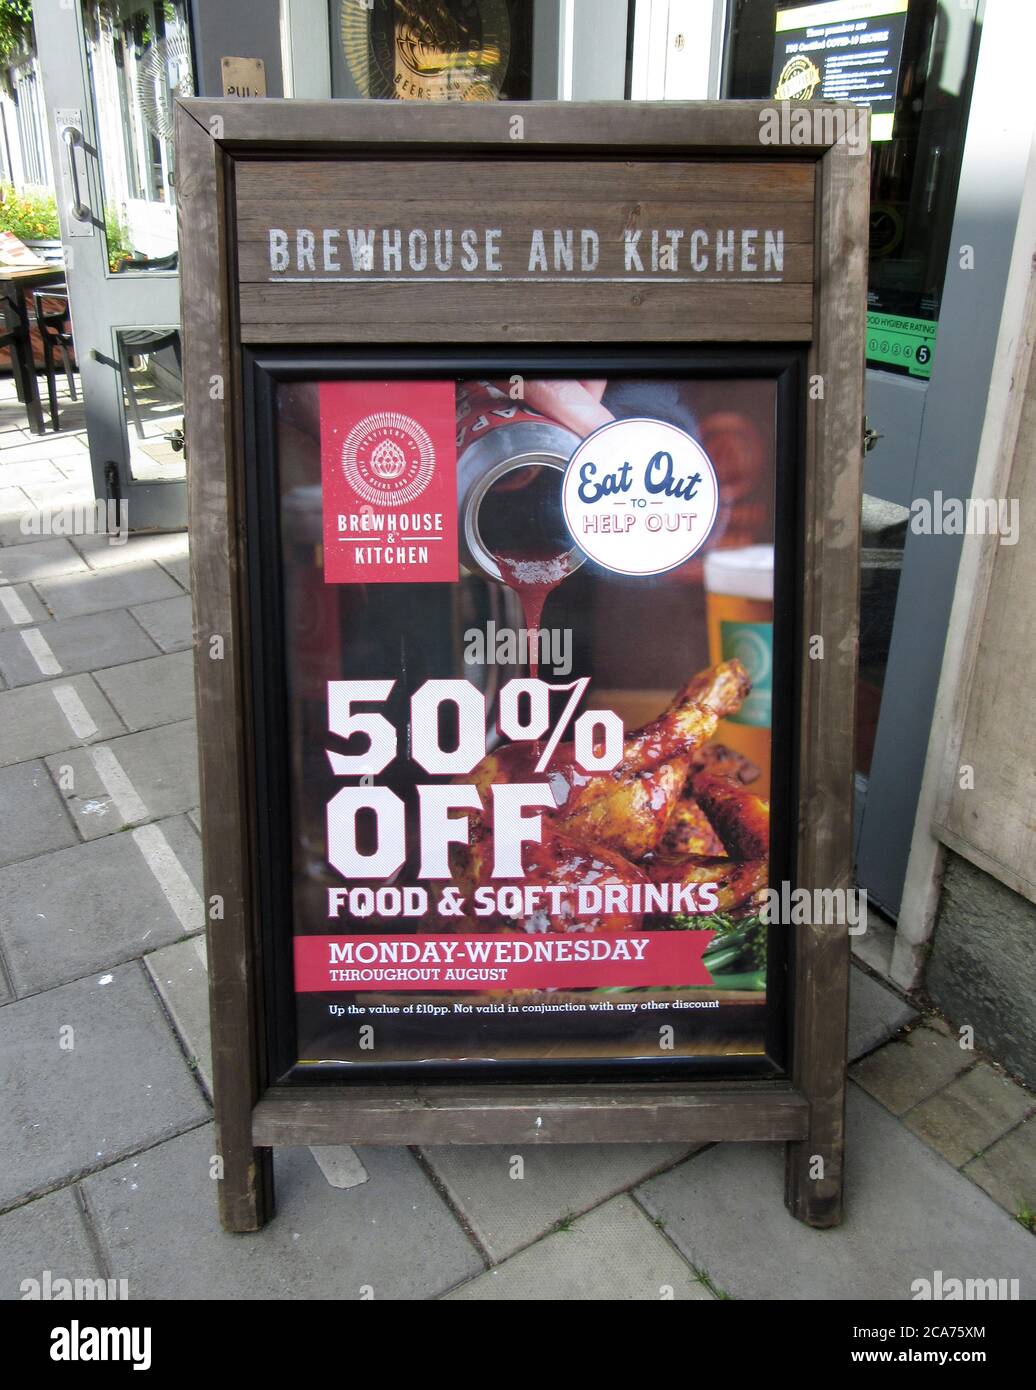 Board sign outside a Brewhouse and Kitchen restaurant informing people of their participation in the nationwide discount dining scheme.Pub Restaurants which have declared themselves as participating in the UK government's 'Eat Out to Help Out Scheme'. Diners receive a 50% discount, up to £10 each, on food or non-alcoholic drinks every Monday, Tuesday and Wednesday during August.  The scheme is to help boost the ailing hospitality industry which has been hit hard during the worldwide coronavirus pandemic. Stock Photo